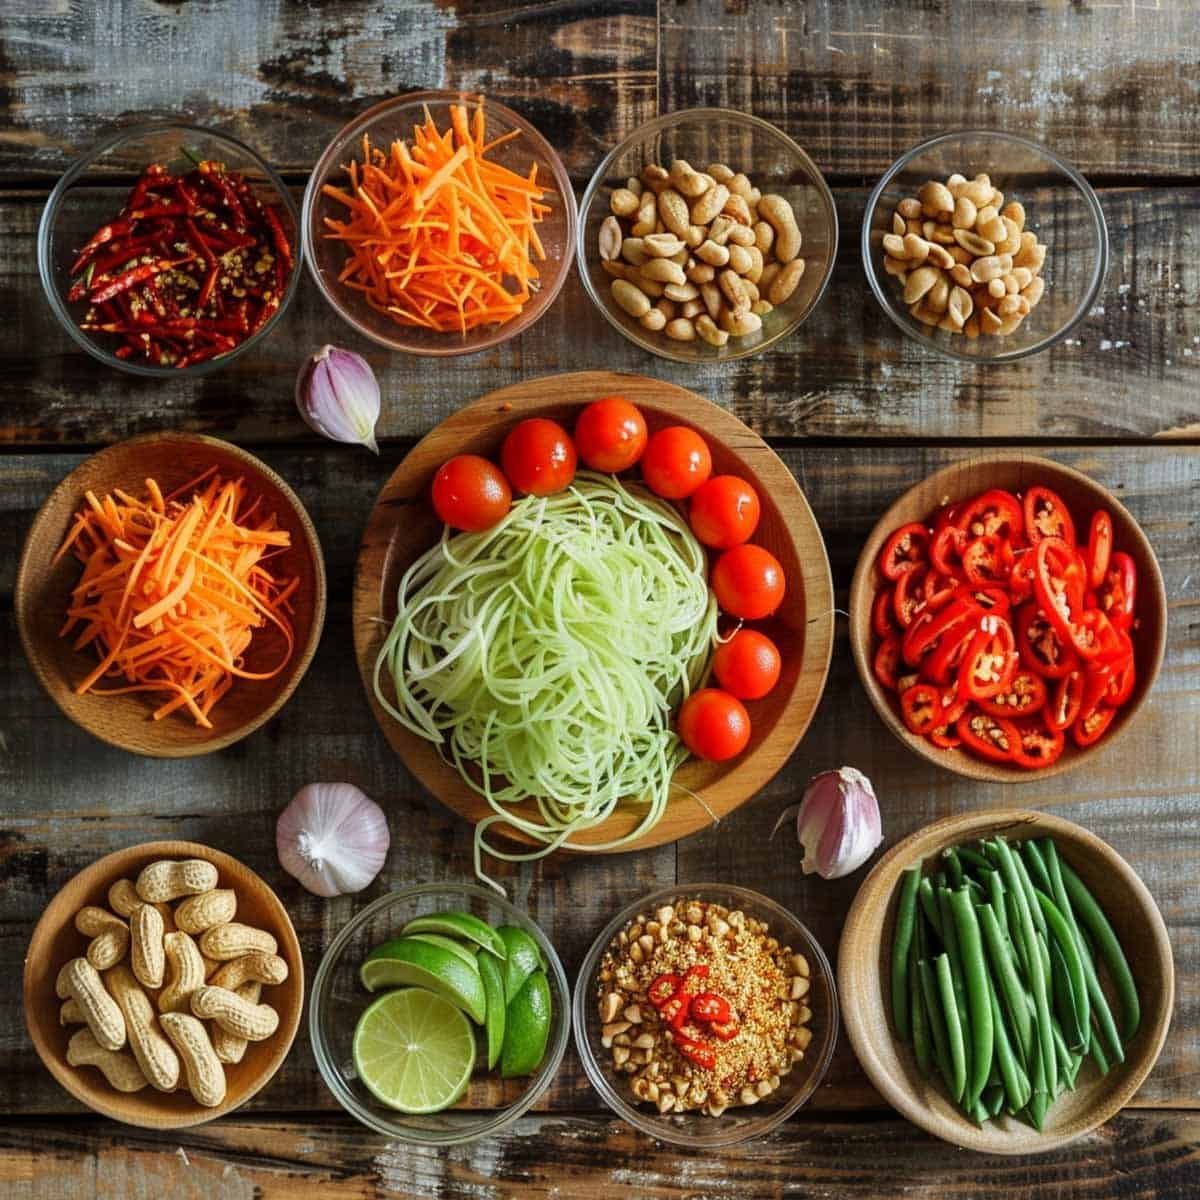 Ingrediants for recipe, rice noodles, green papaya, cherry tomatoes, long green beans, carrots, roasted penuts,
dried shrimp, Thai Chilli peppers, 